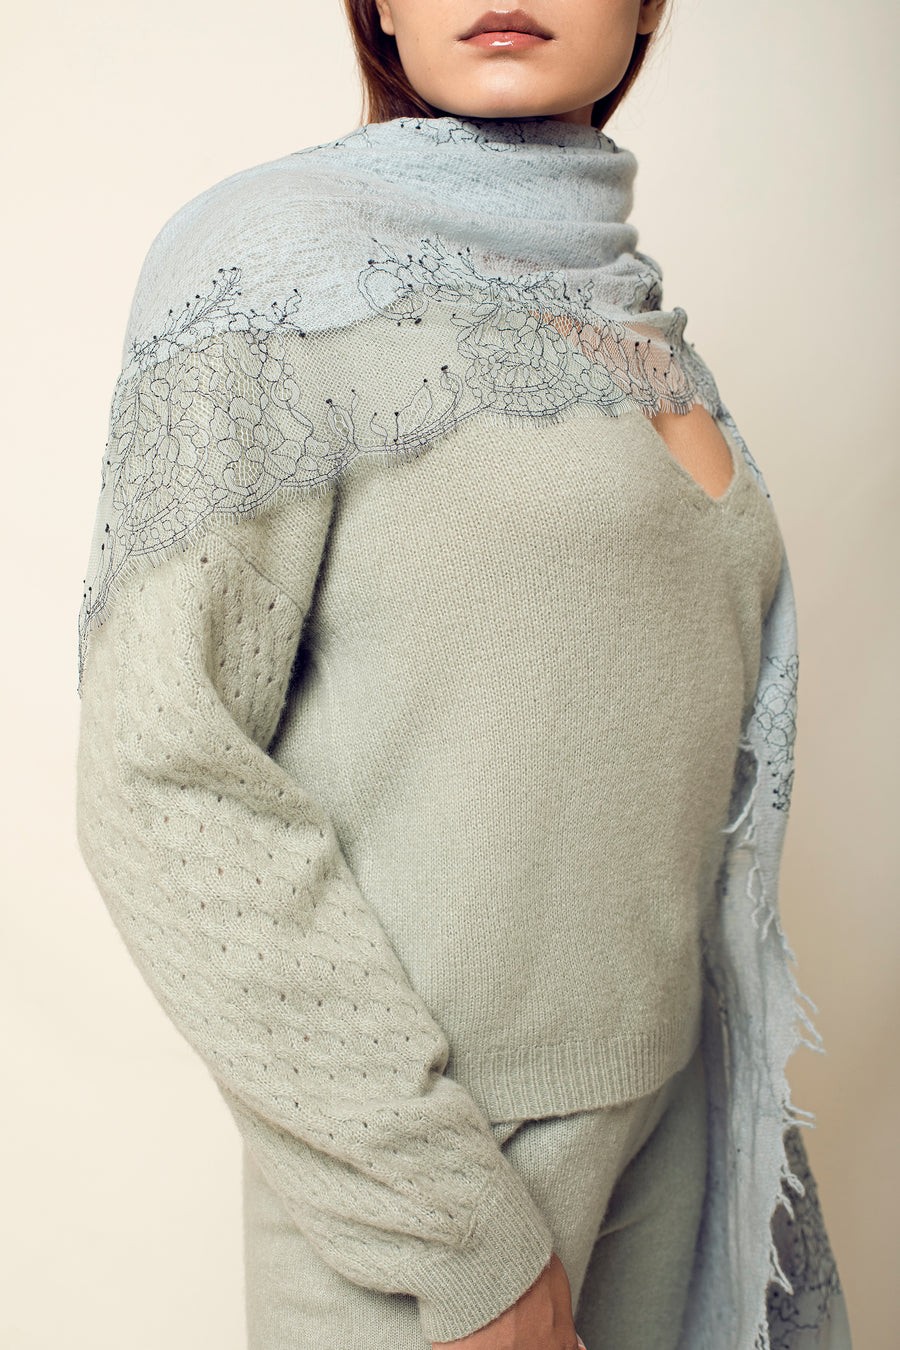 LACE ON LOOSE KNIT STOLE